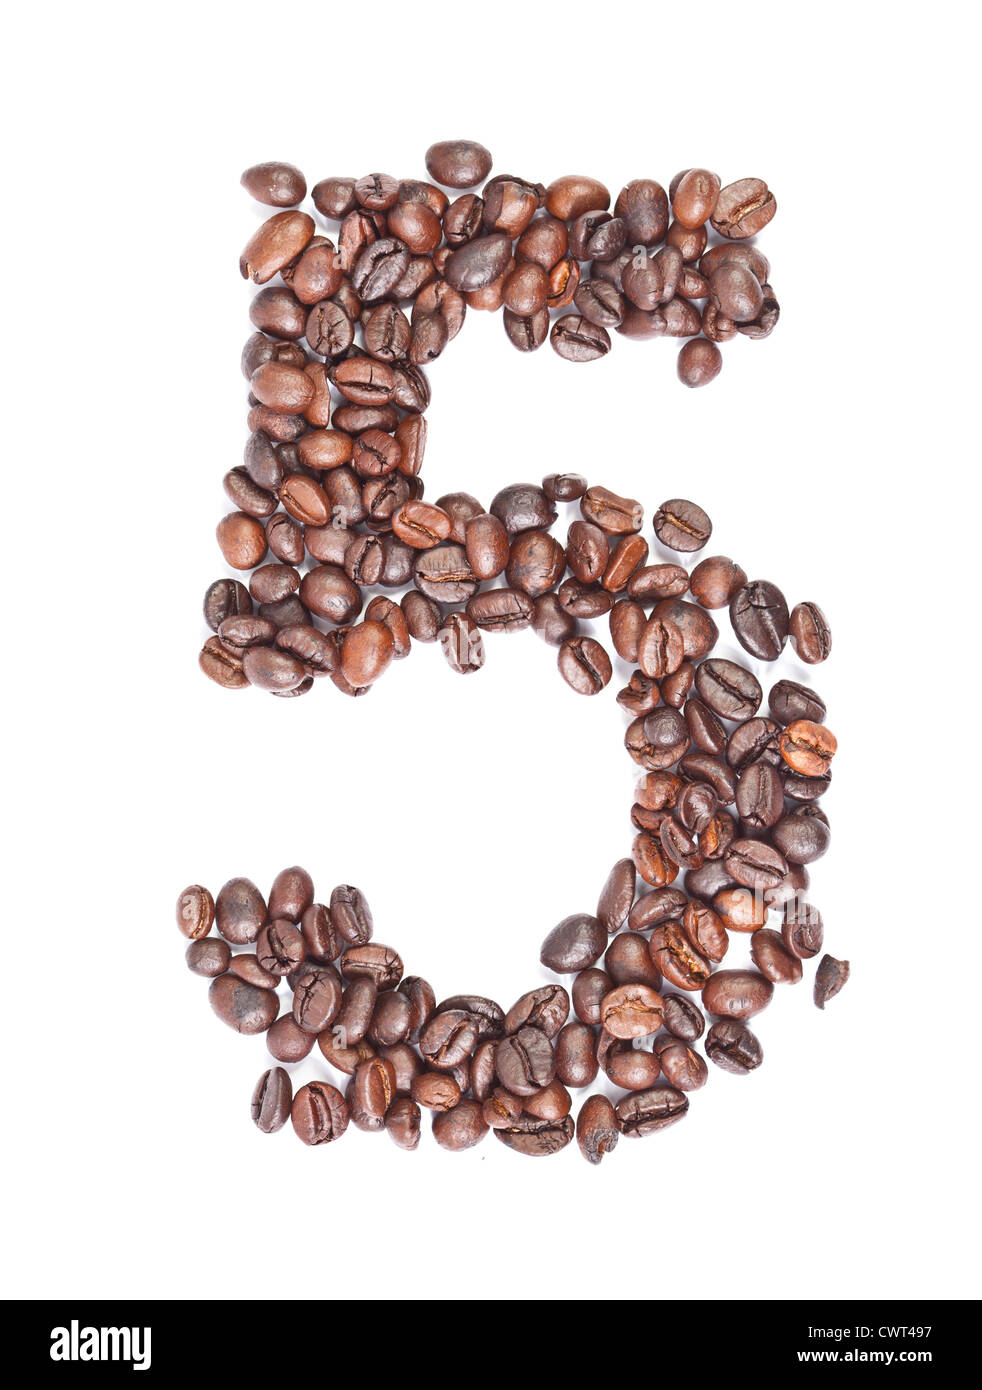 5, number made with coffee beans on a white background Stock Photo